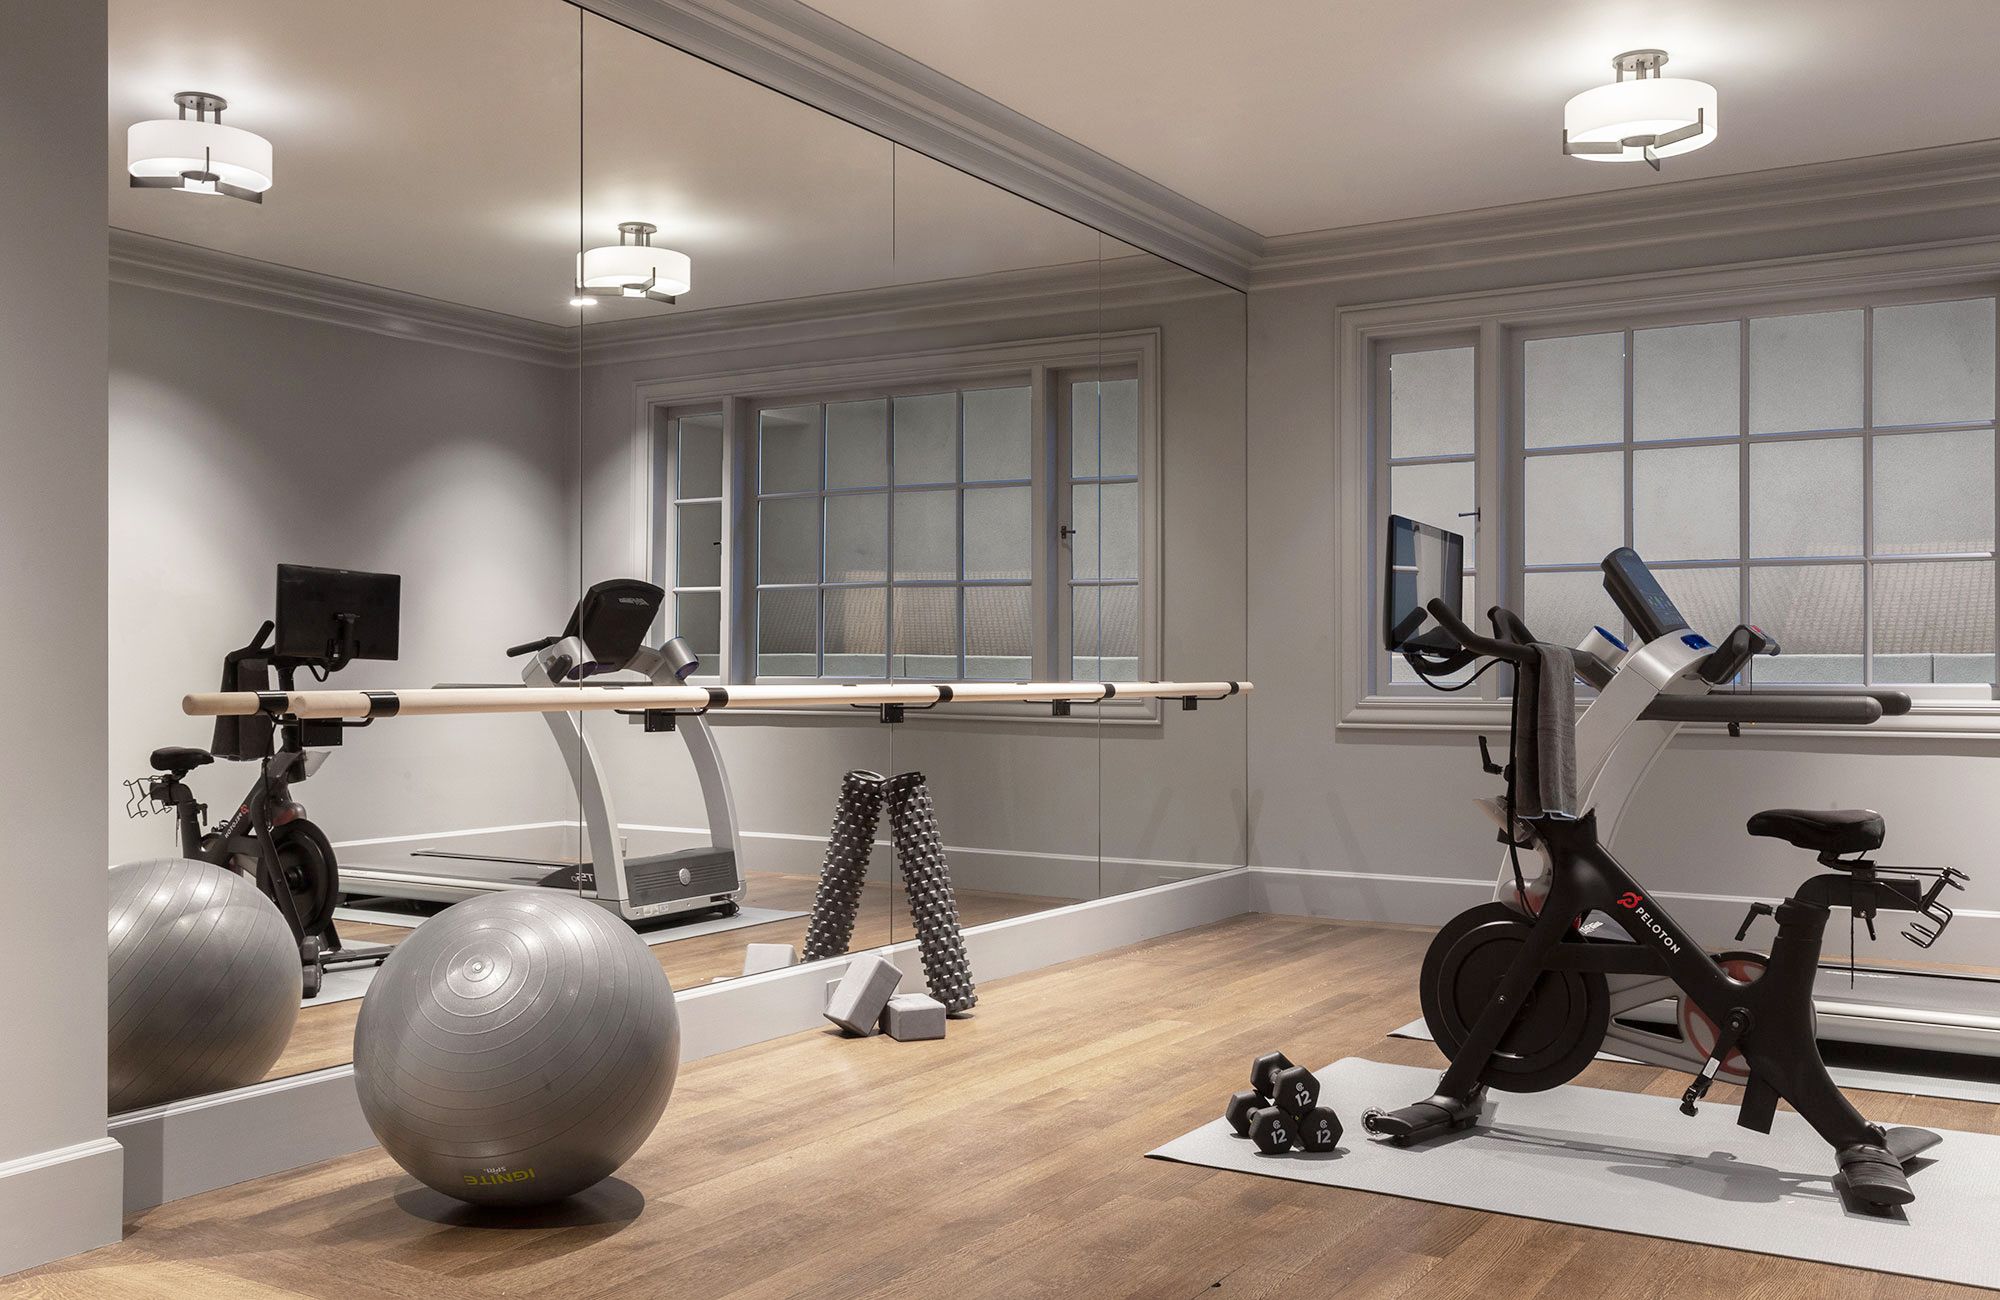 23 Gym Design Ideas For Your Home Exercise Room Extra Space 60 Off